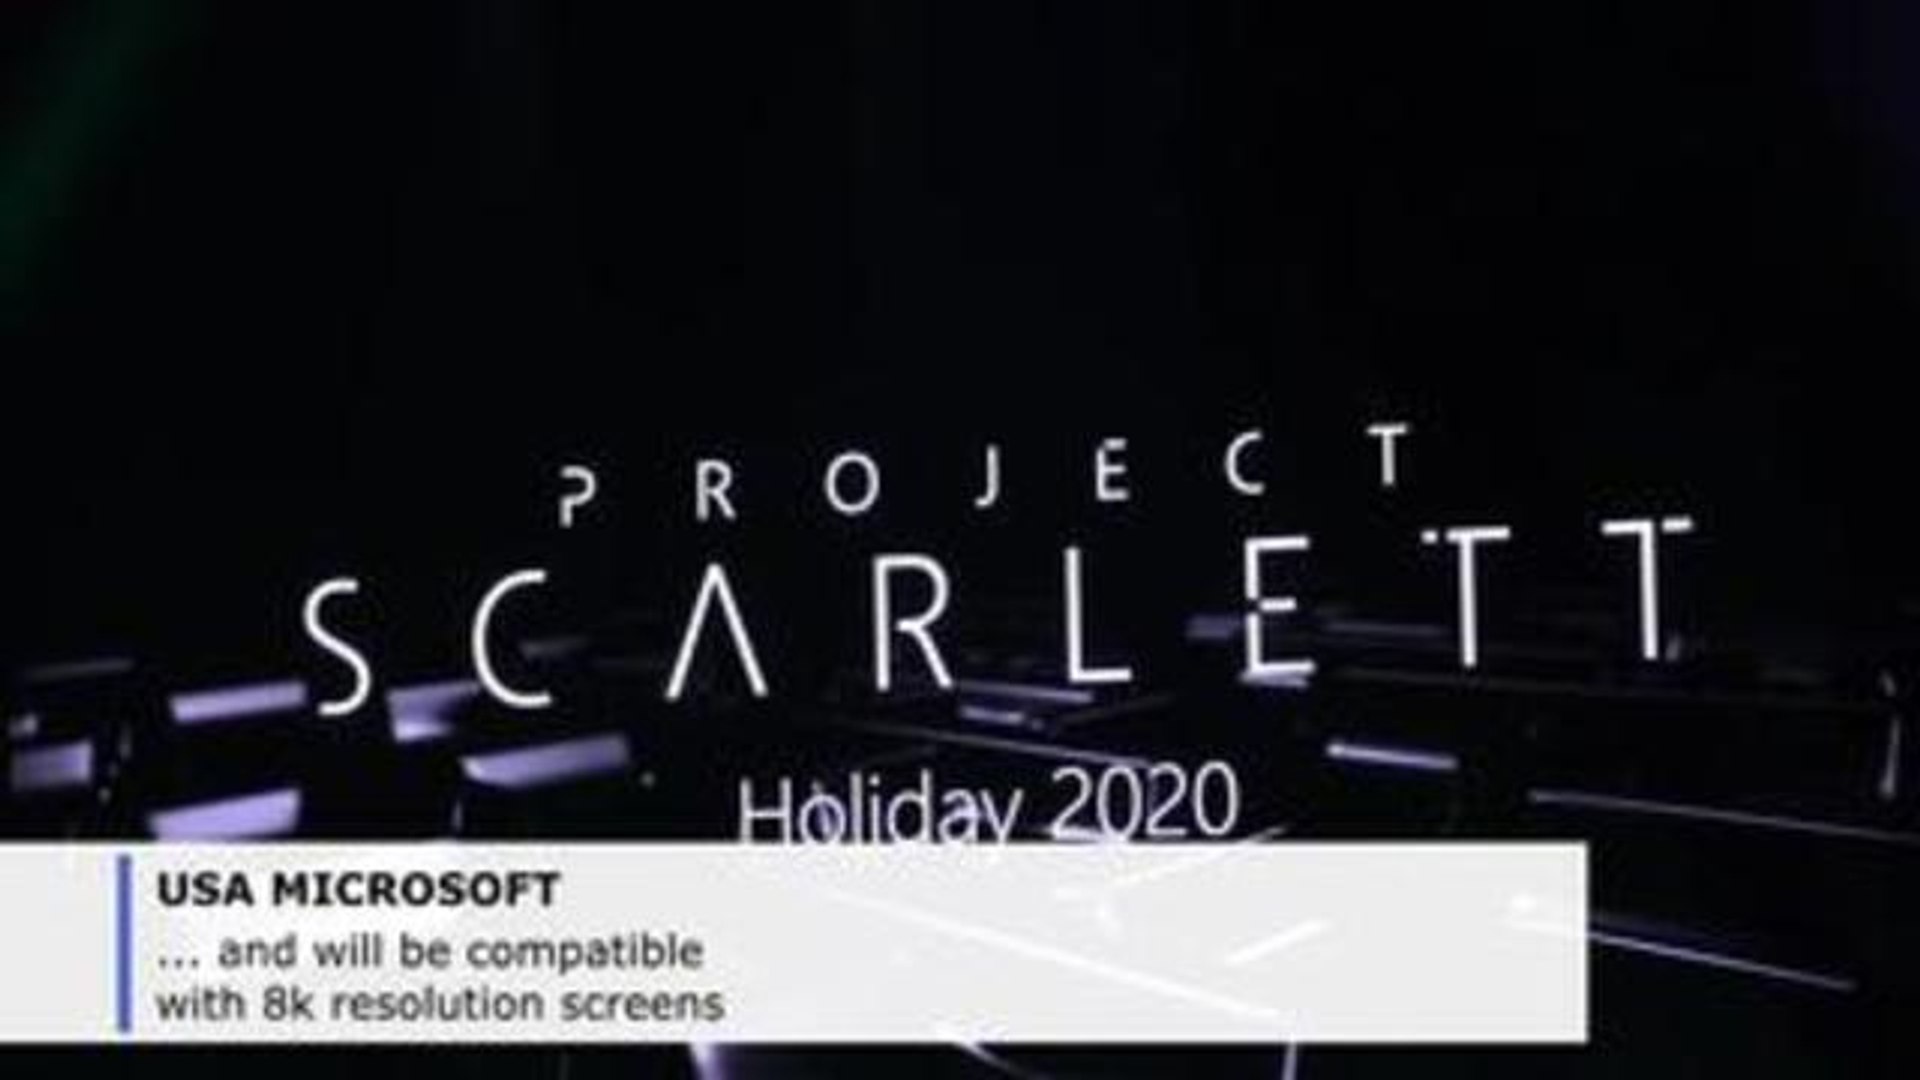 New Xbox game console Project Scarlett to land in 2020